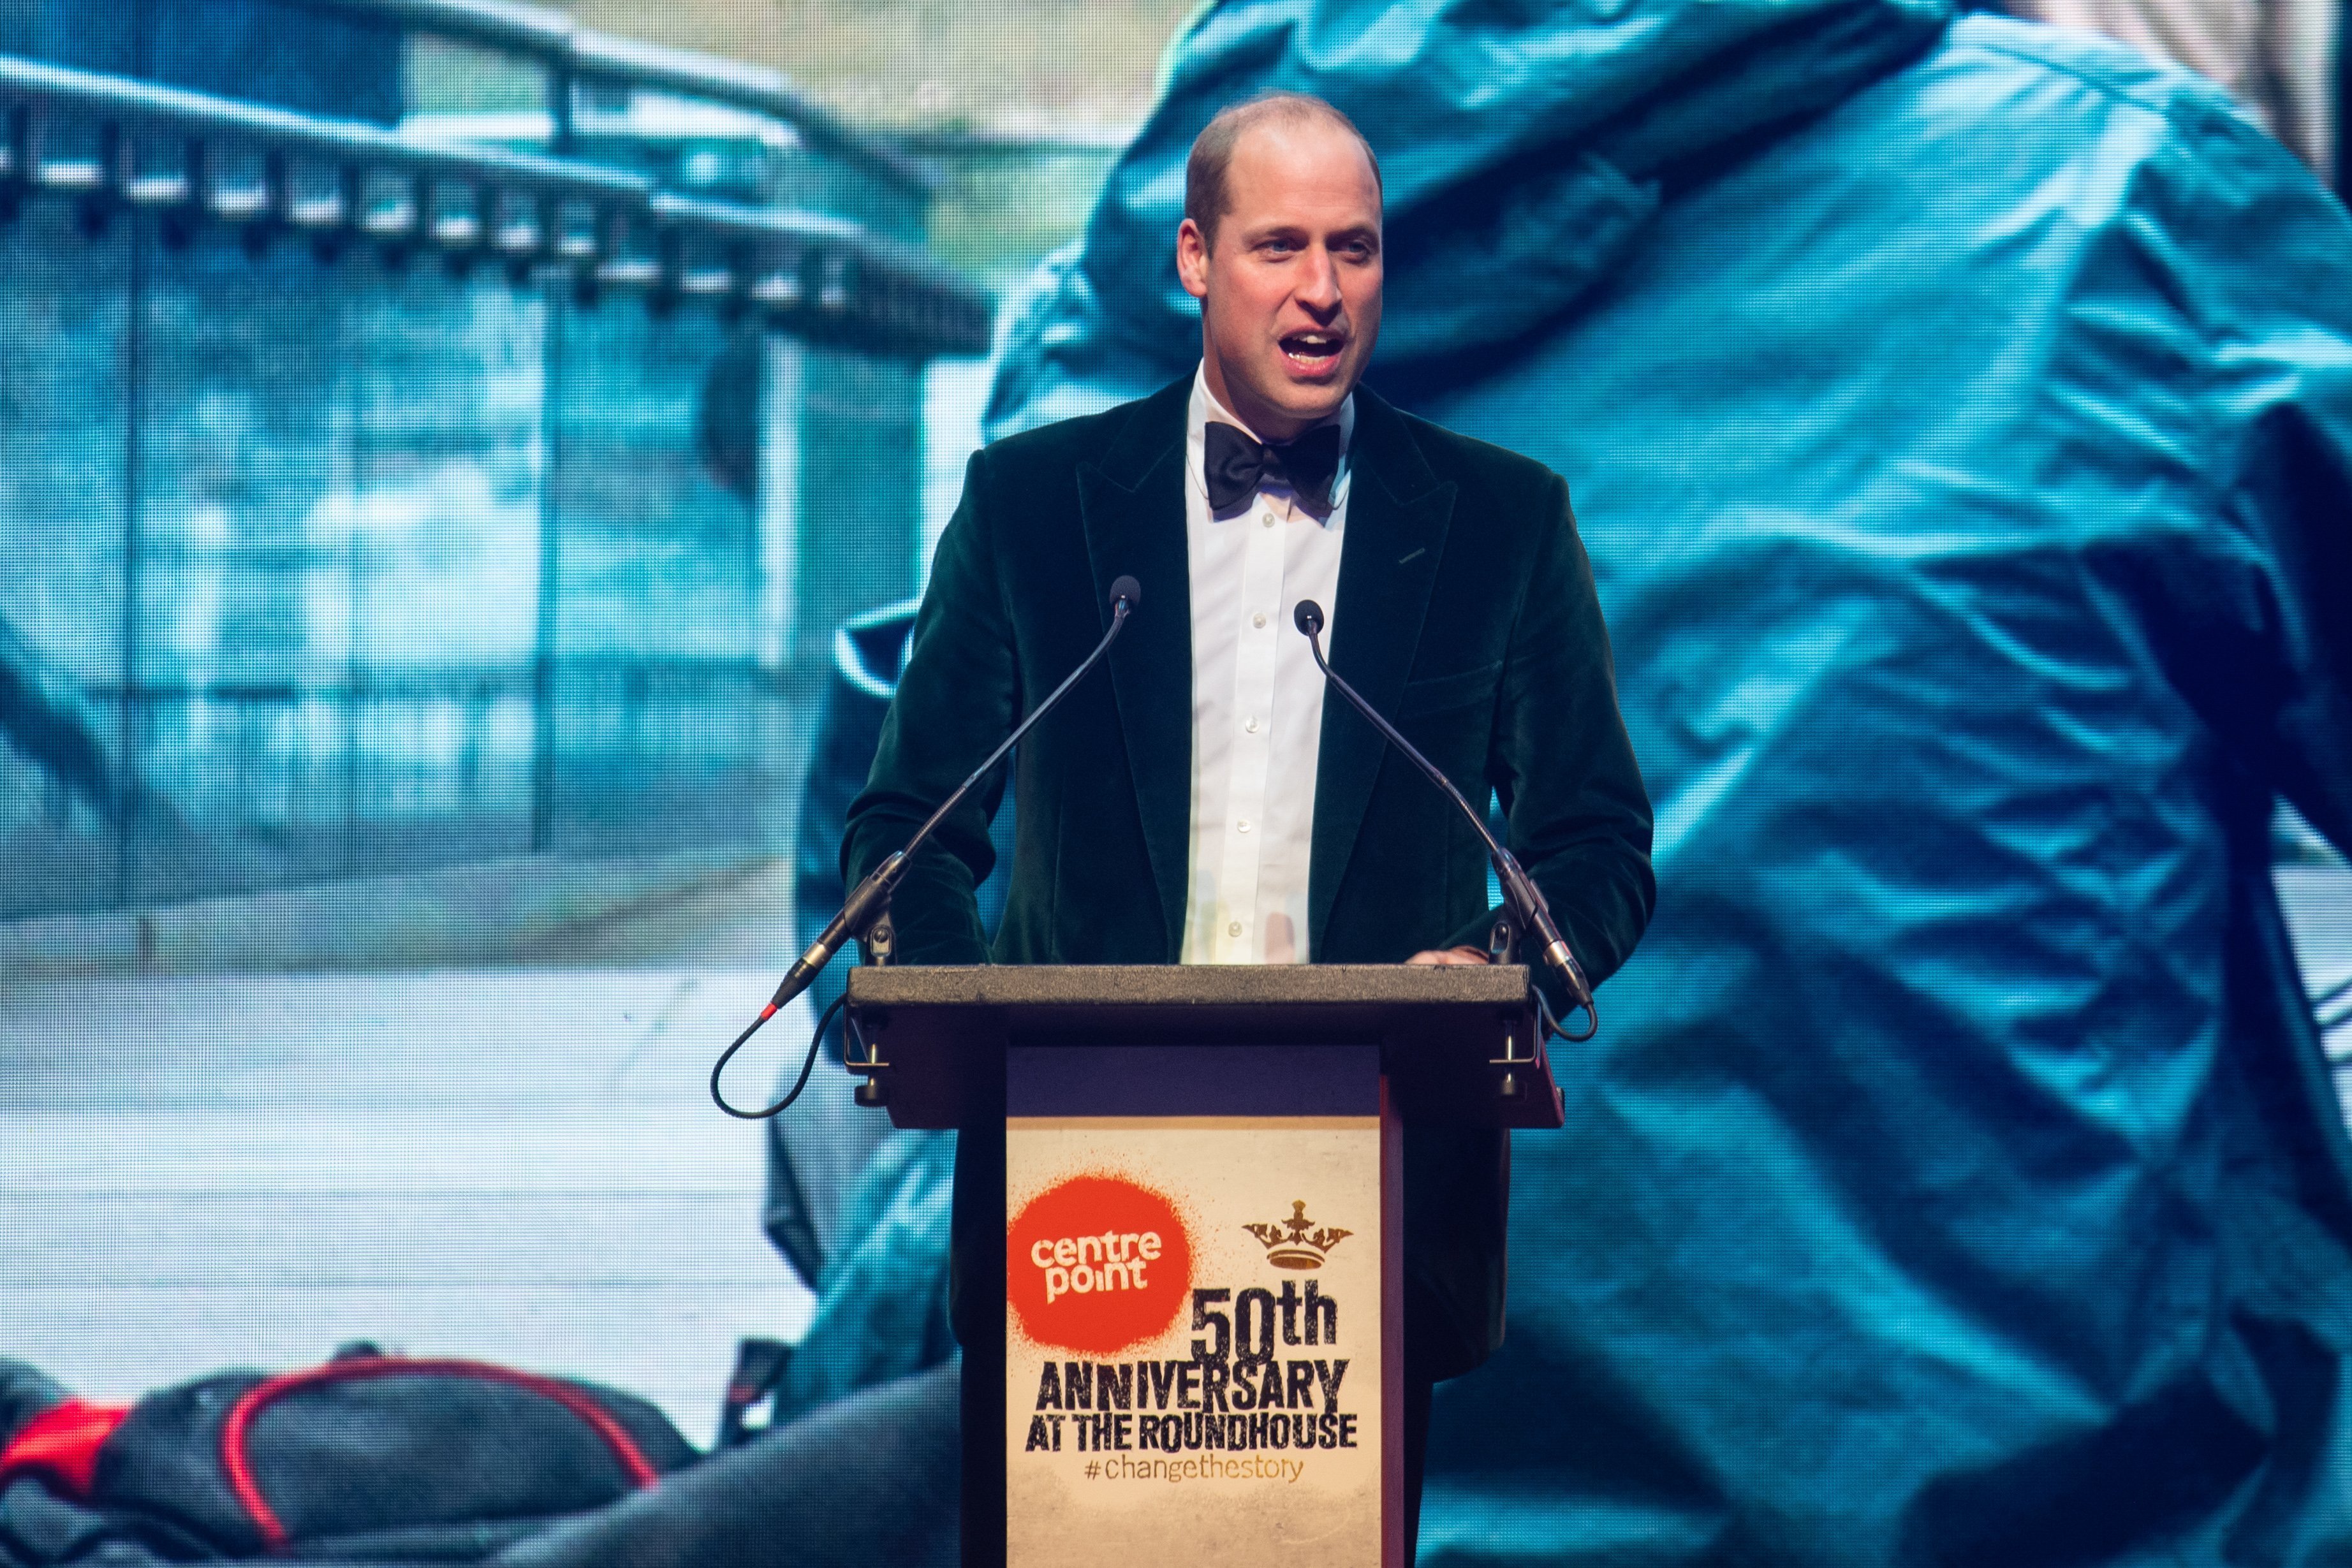 Prince William at a gala to mark the Centrepoint's 50 years of tackling youth homelessness on November 13, 2019, in London, England | Photo: Dominic Lipinski/Getty Images